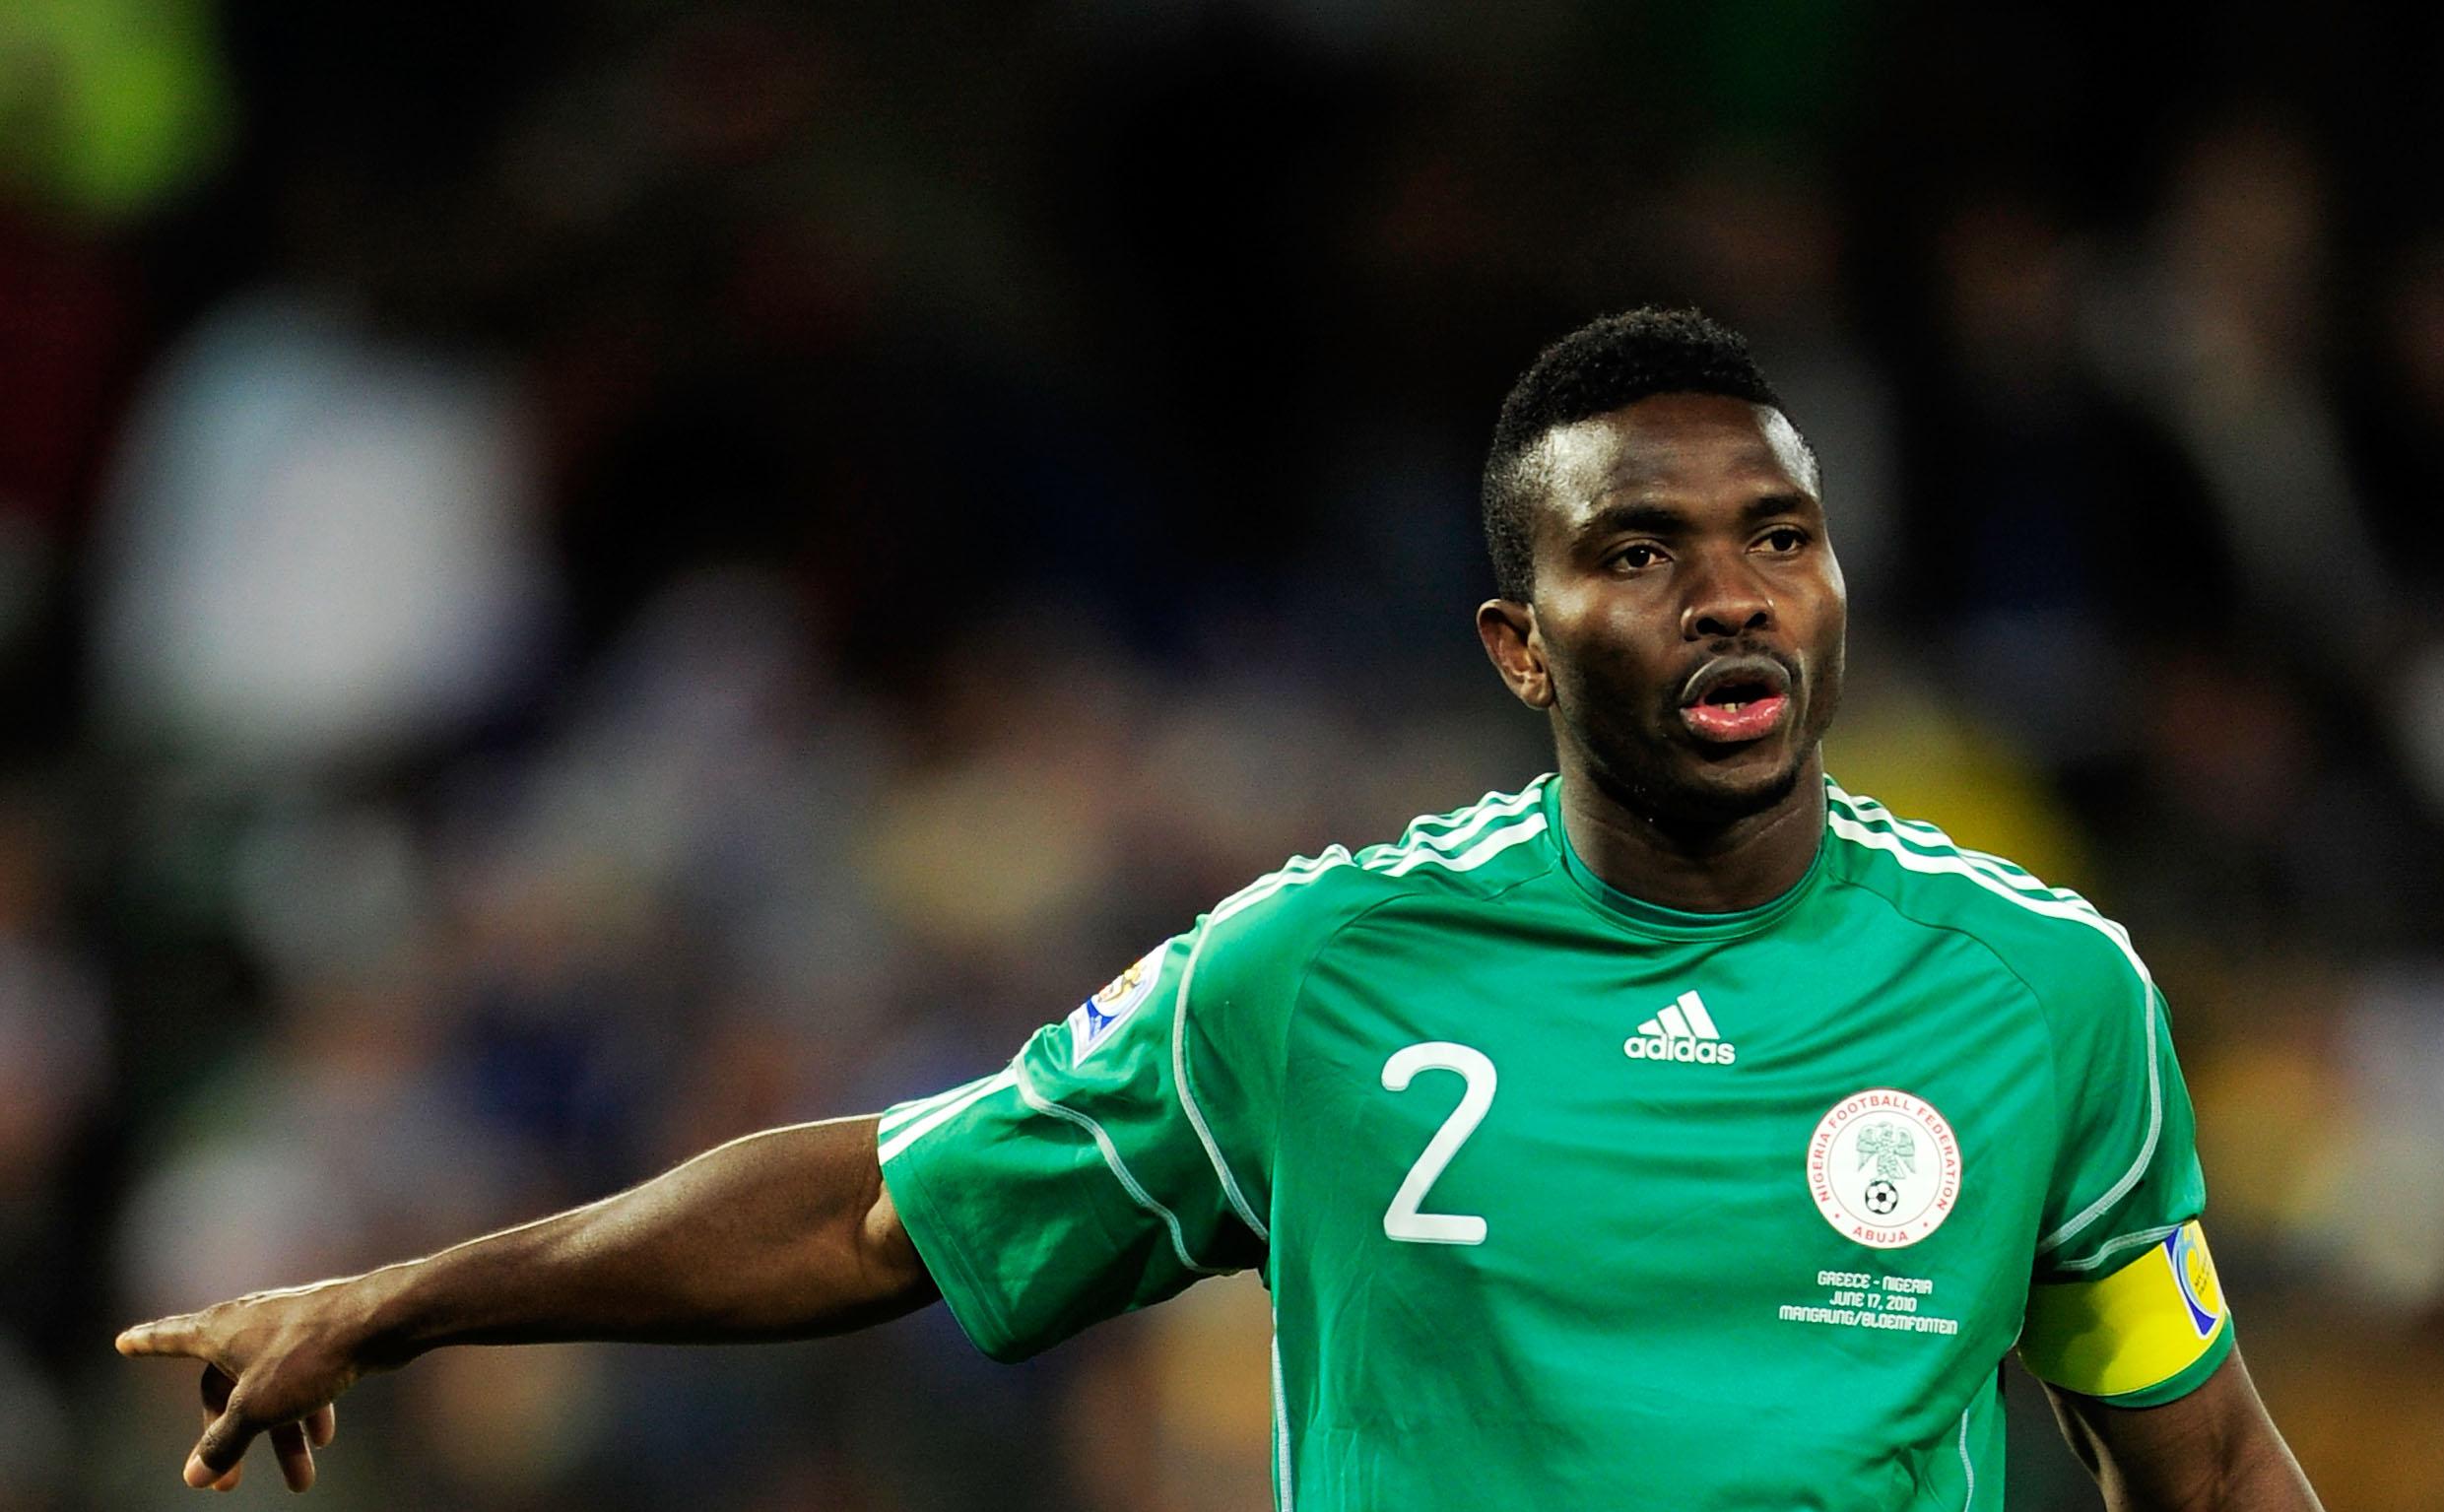 Nkwocha, Yobo join other African legends in COVID-19 campaign